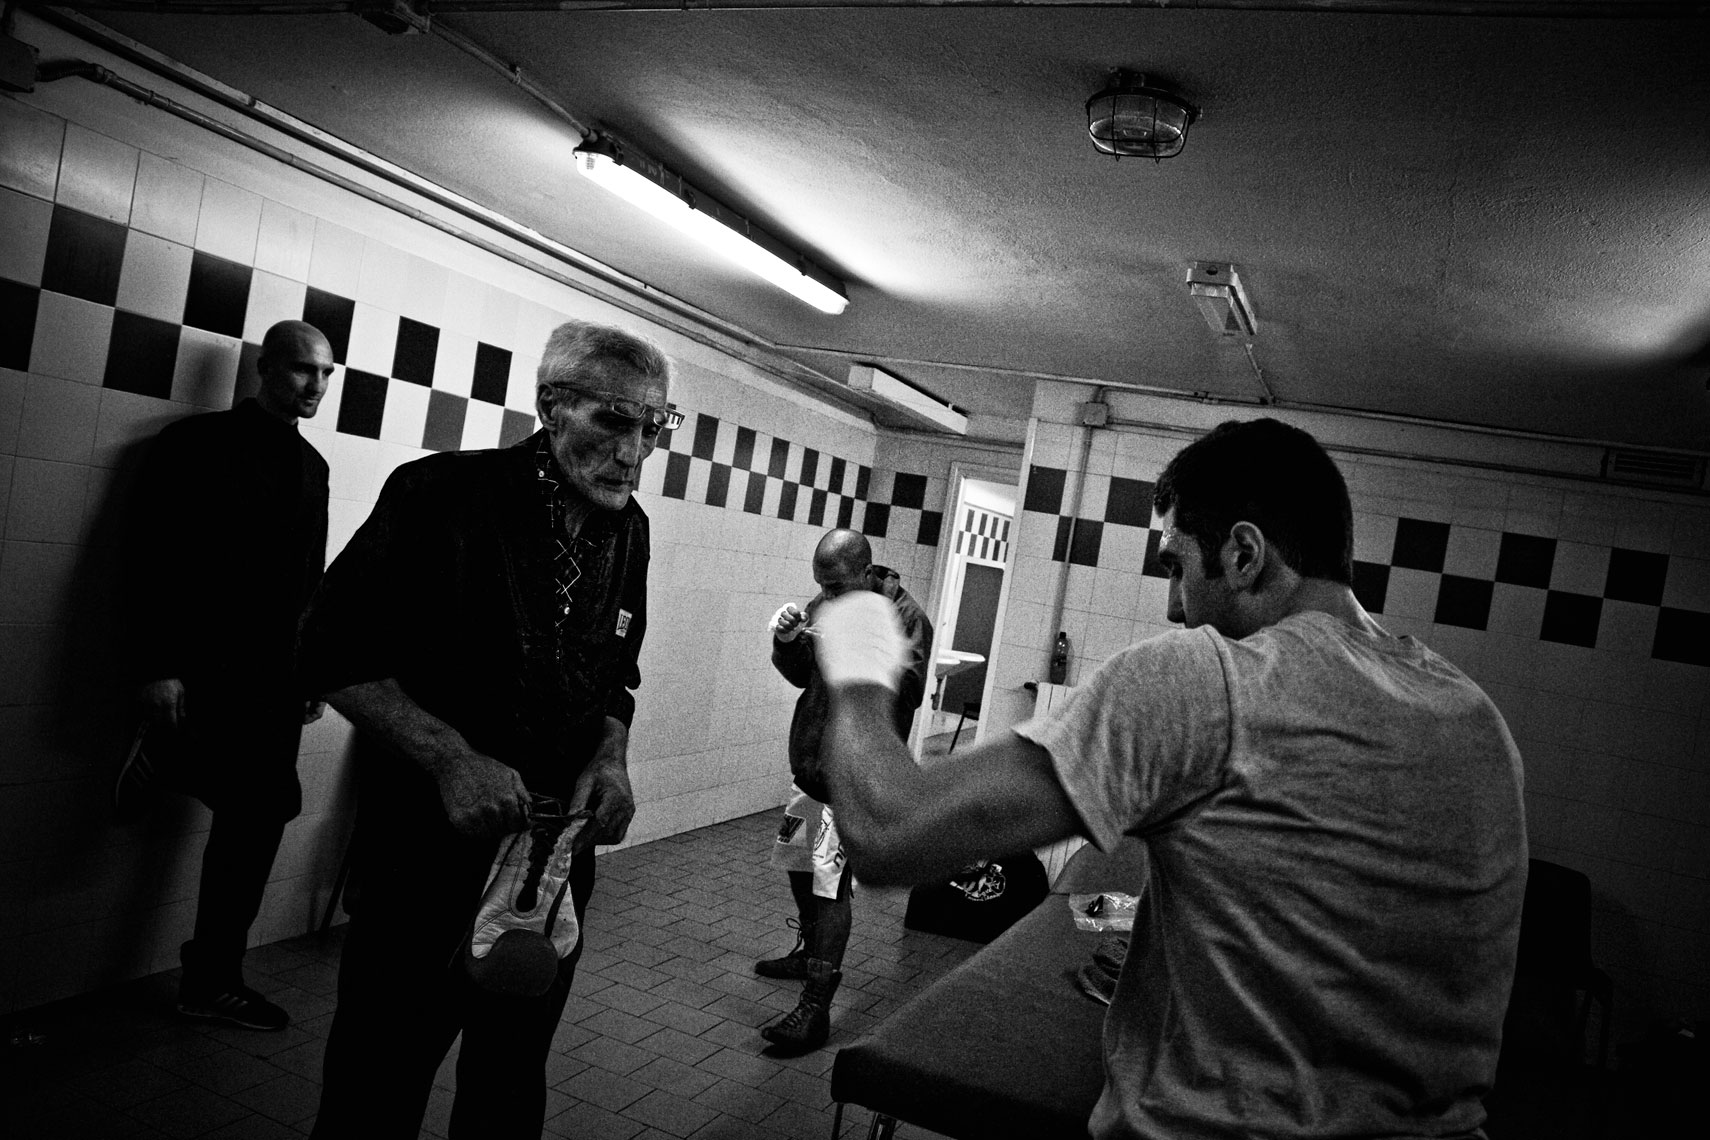 ITALY. Florence, 4th November 2011. Mandela Forum, the night of the match for the EBU (European Boxing Union) Welter Weight crown, Leonard Bundu warming up for the match. On the right Mr. Fiordigiglio, another boxer signed with Mr. Loreni agency, warming up with his trainer (on the left) to fight in a match before the EBU one.